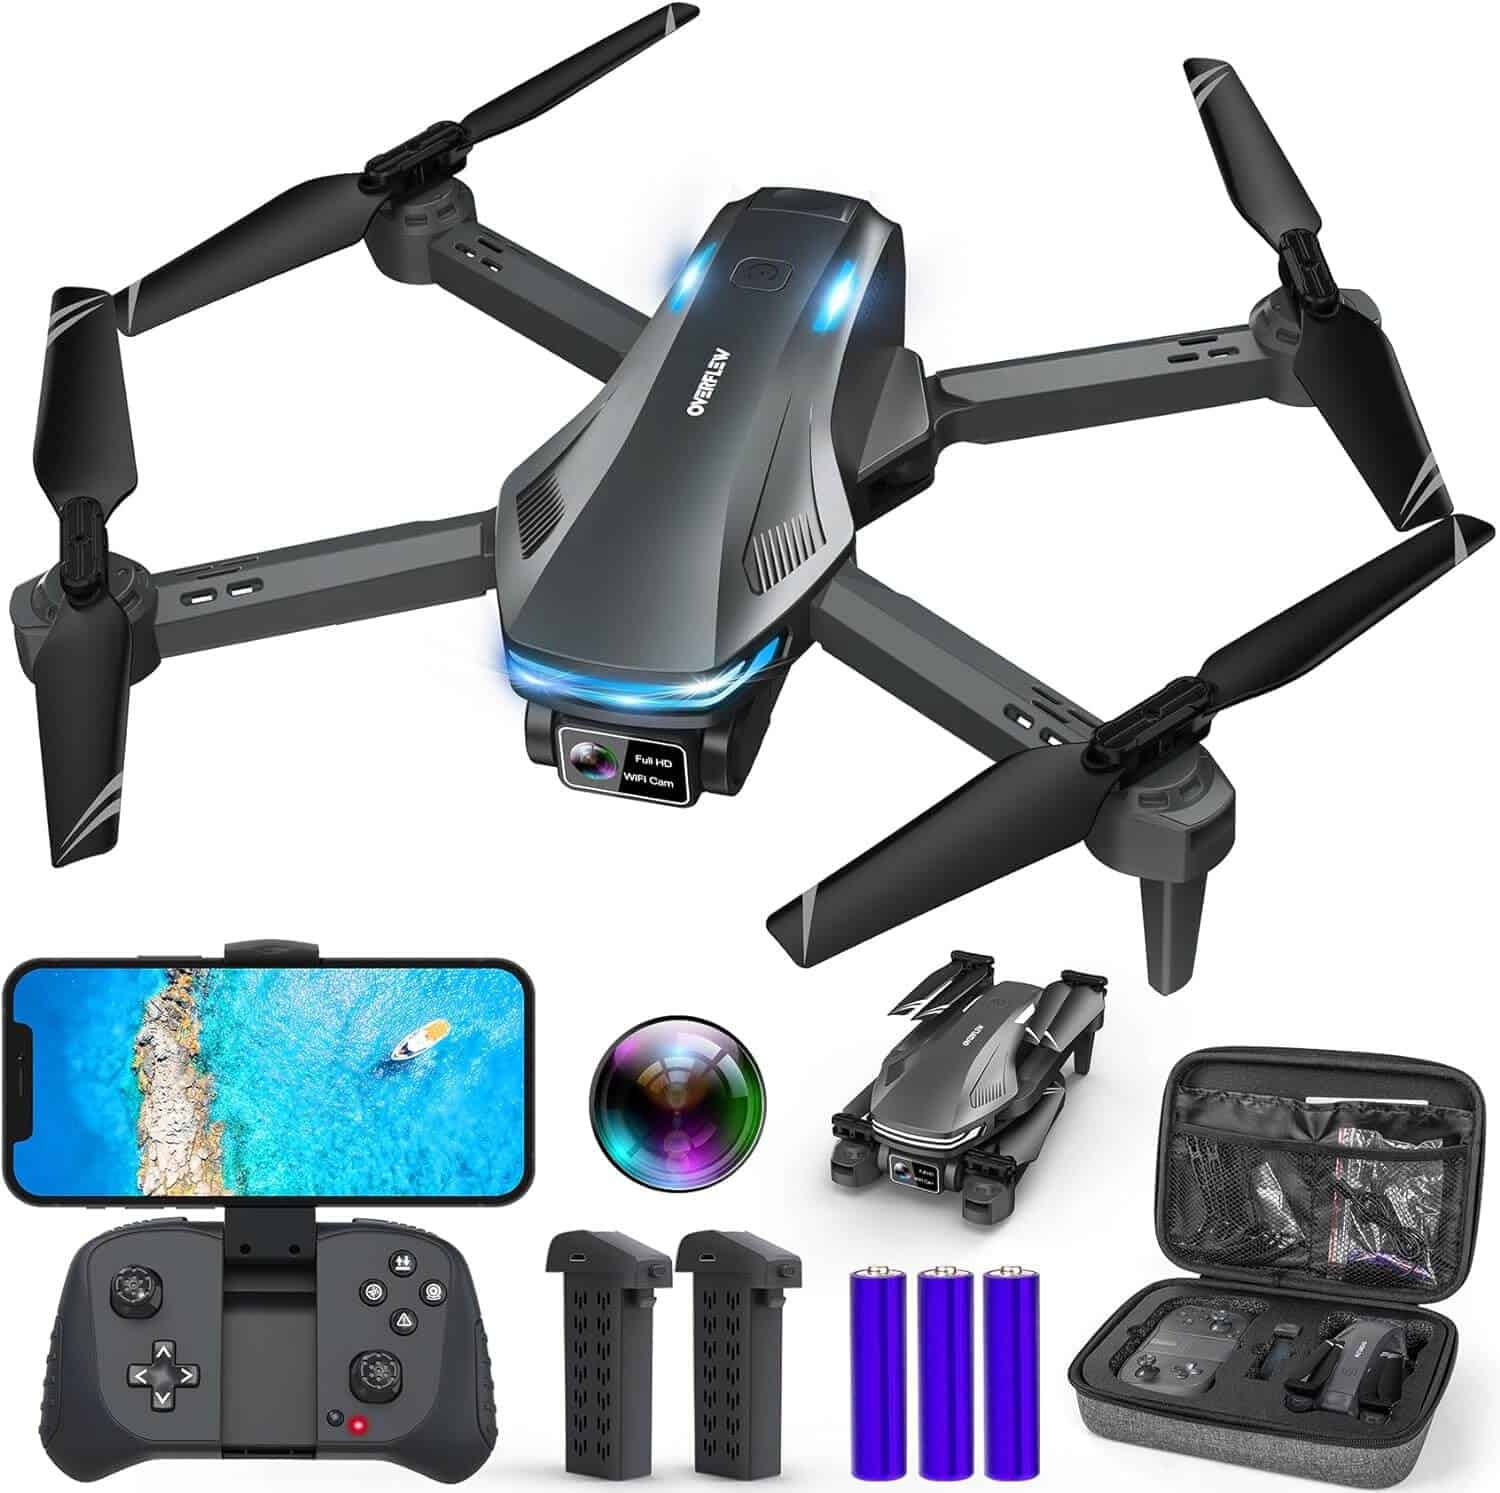 A great beginner Drone with Camera. It's user-friendly yet feature-packed, and comes with Altitude Hold, Voice Control, Gestures Selfie, 90° Adjustable Lens, and 3D Flips.